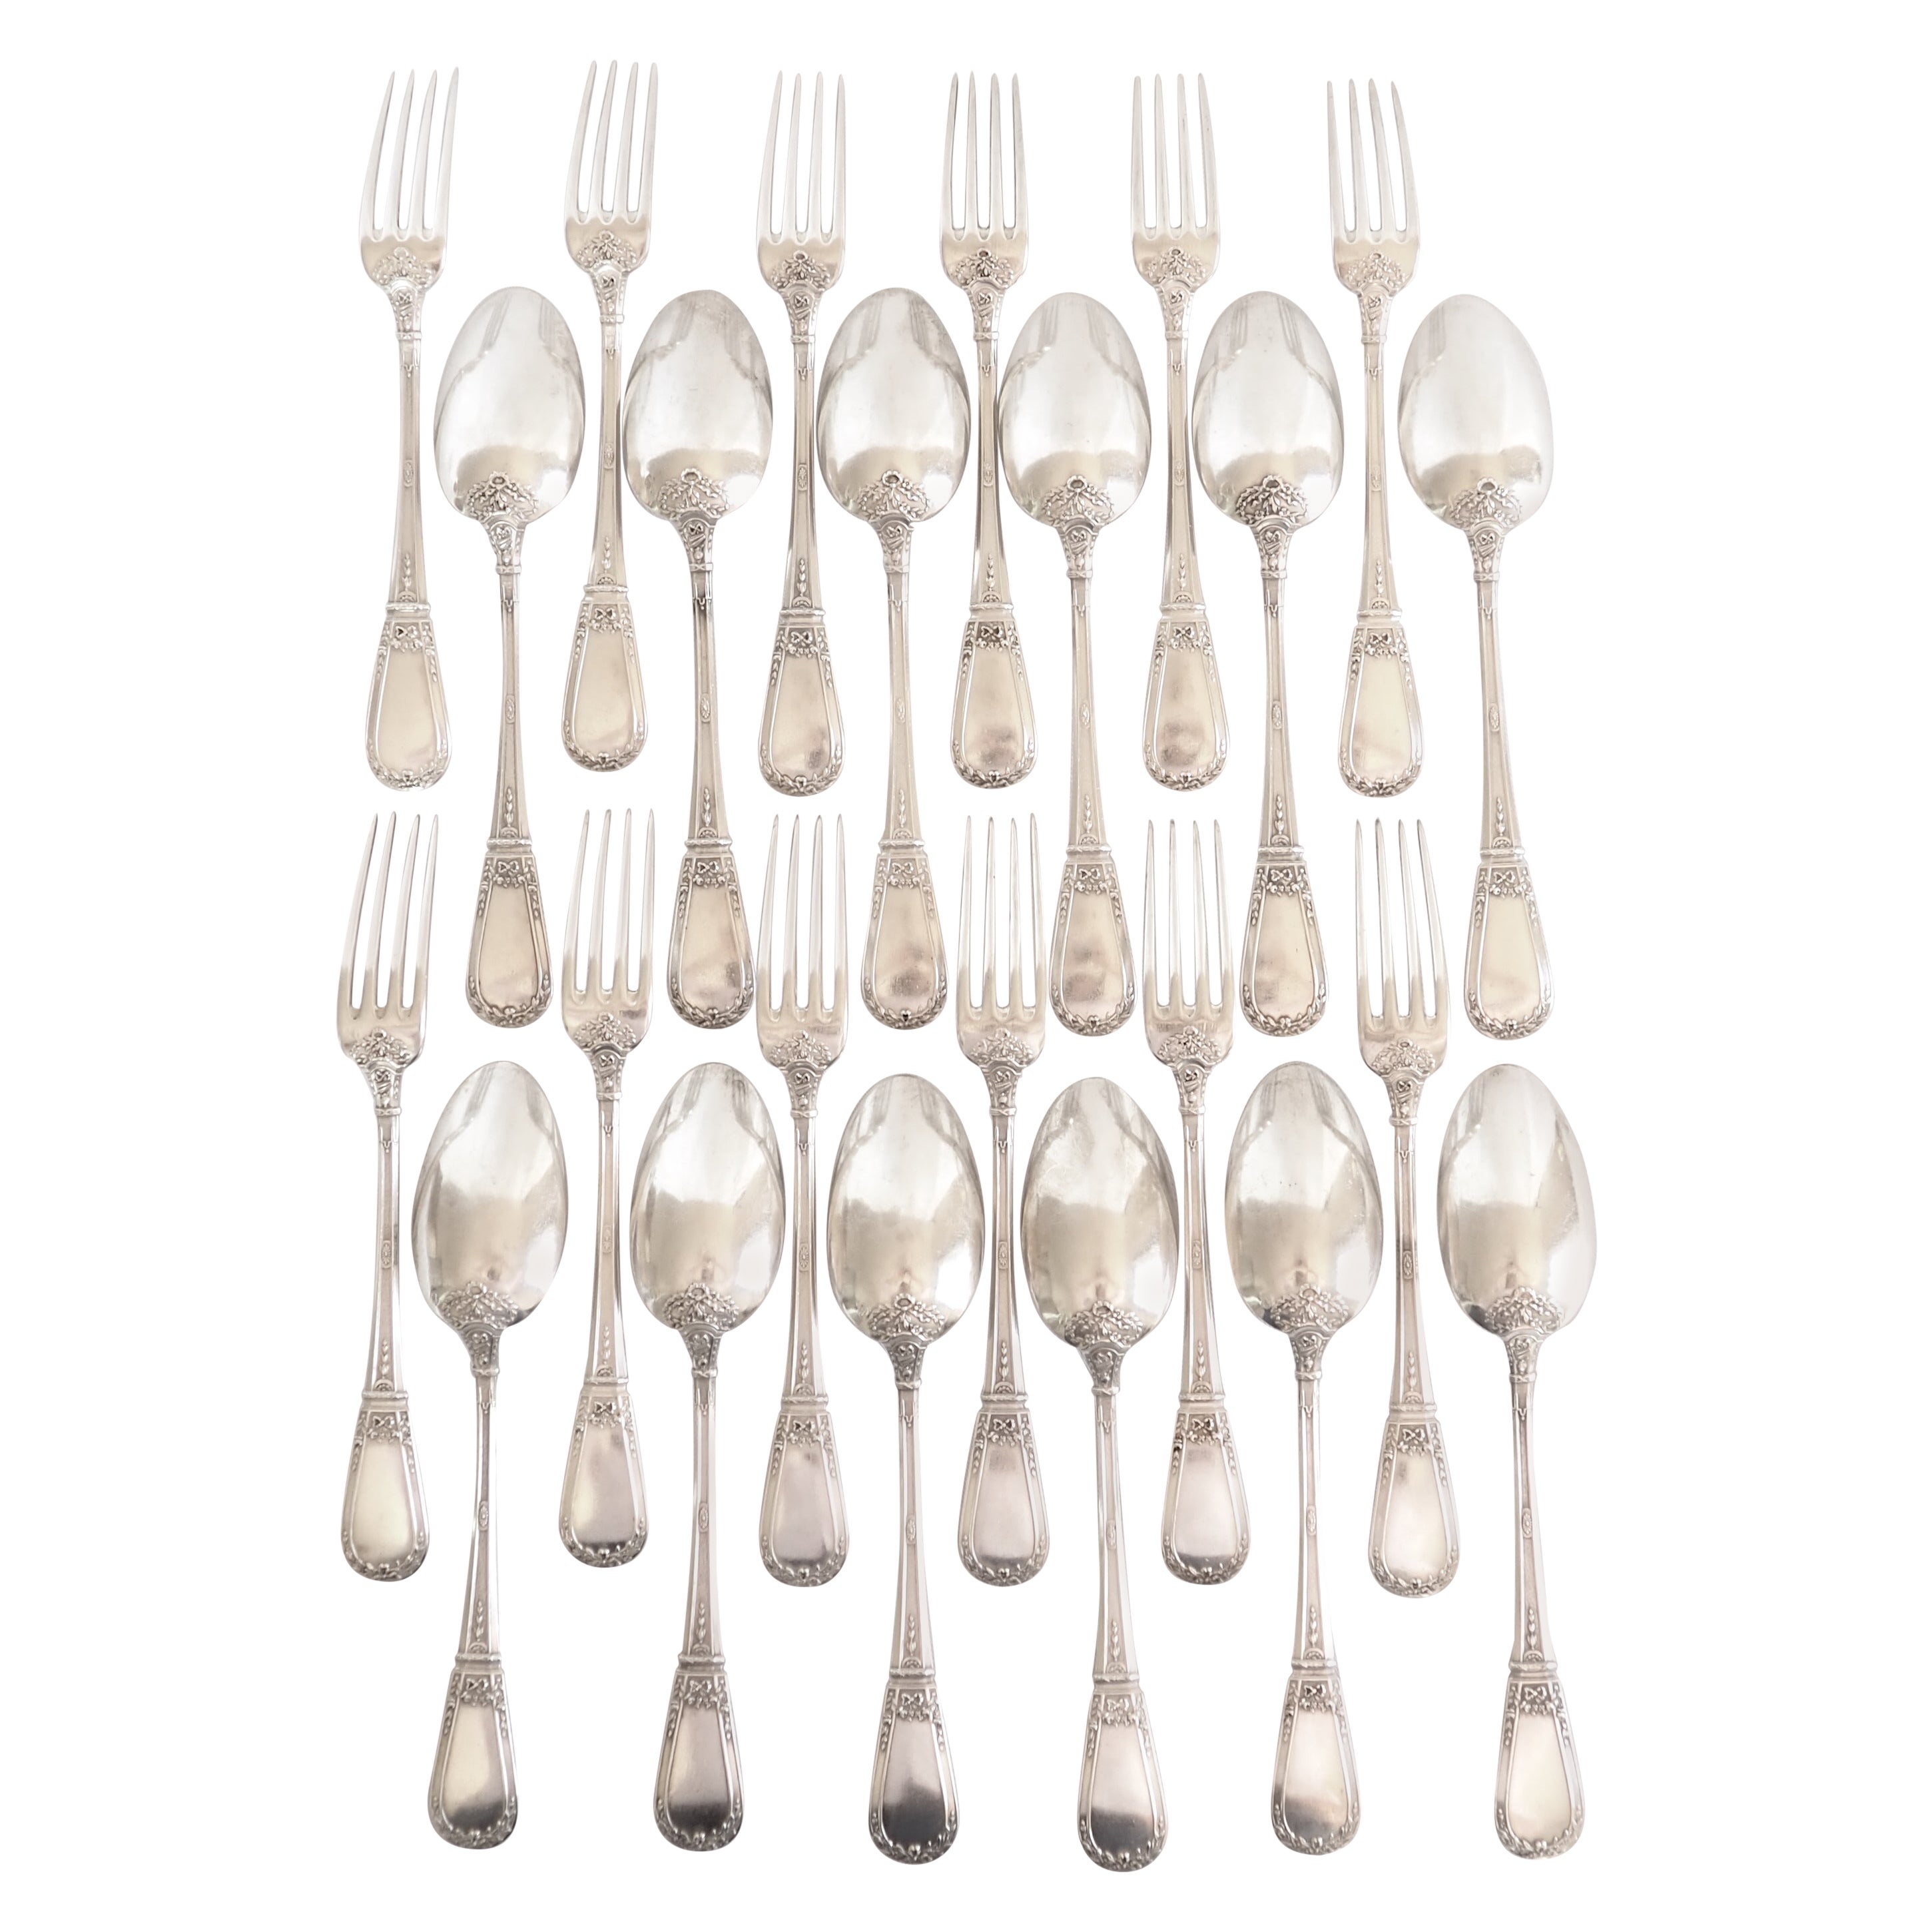 French antique sterling silver dessert flatware - 24 pieces - Louis XVI style For Sale